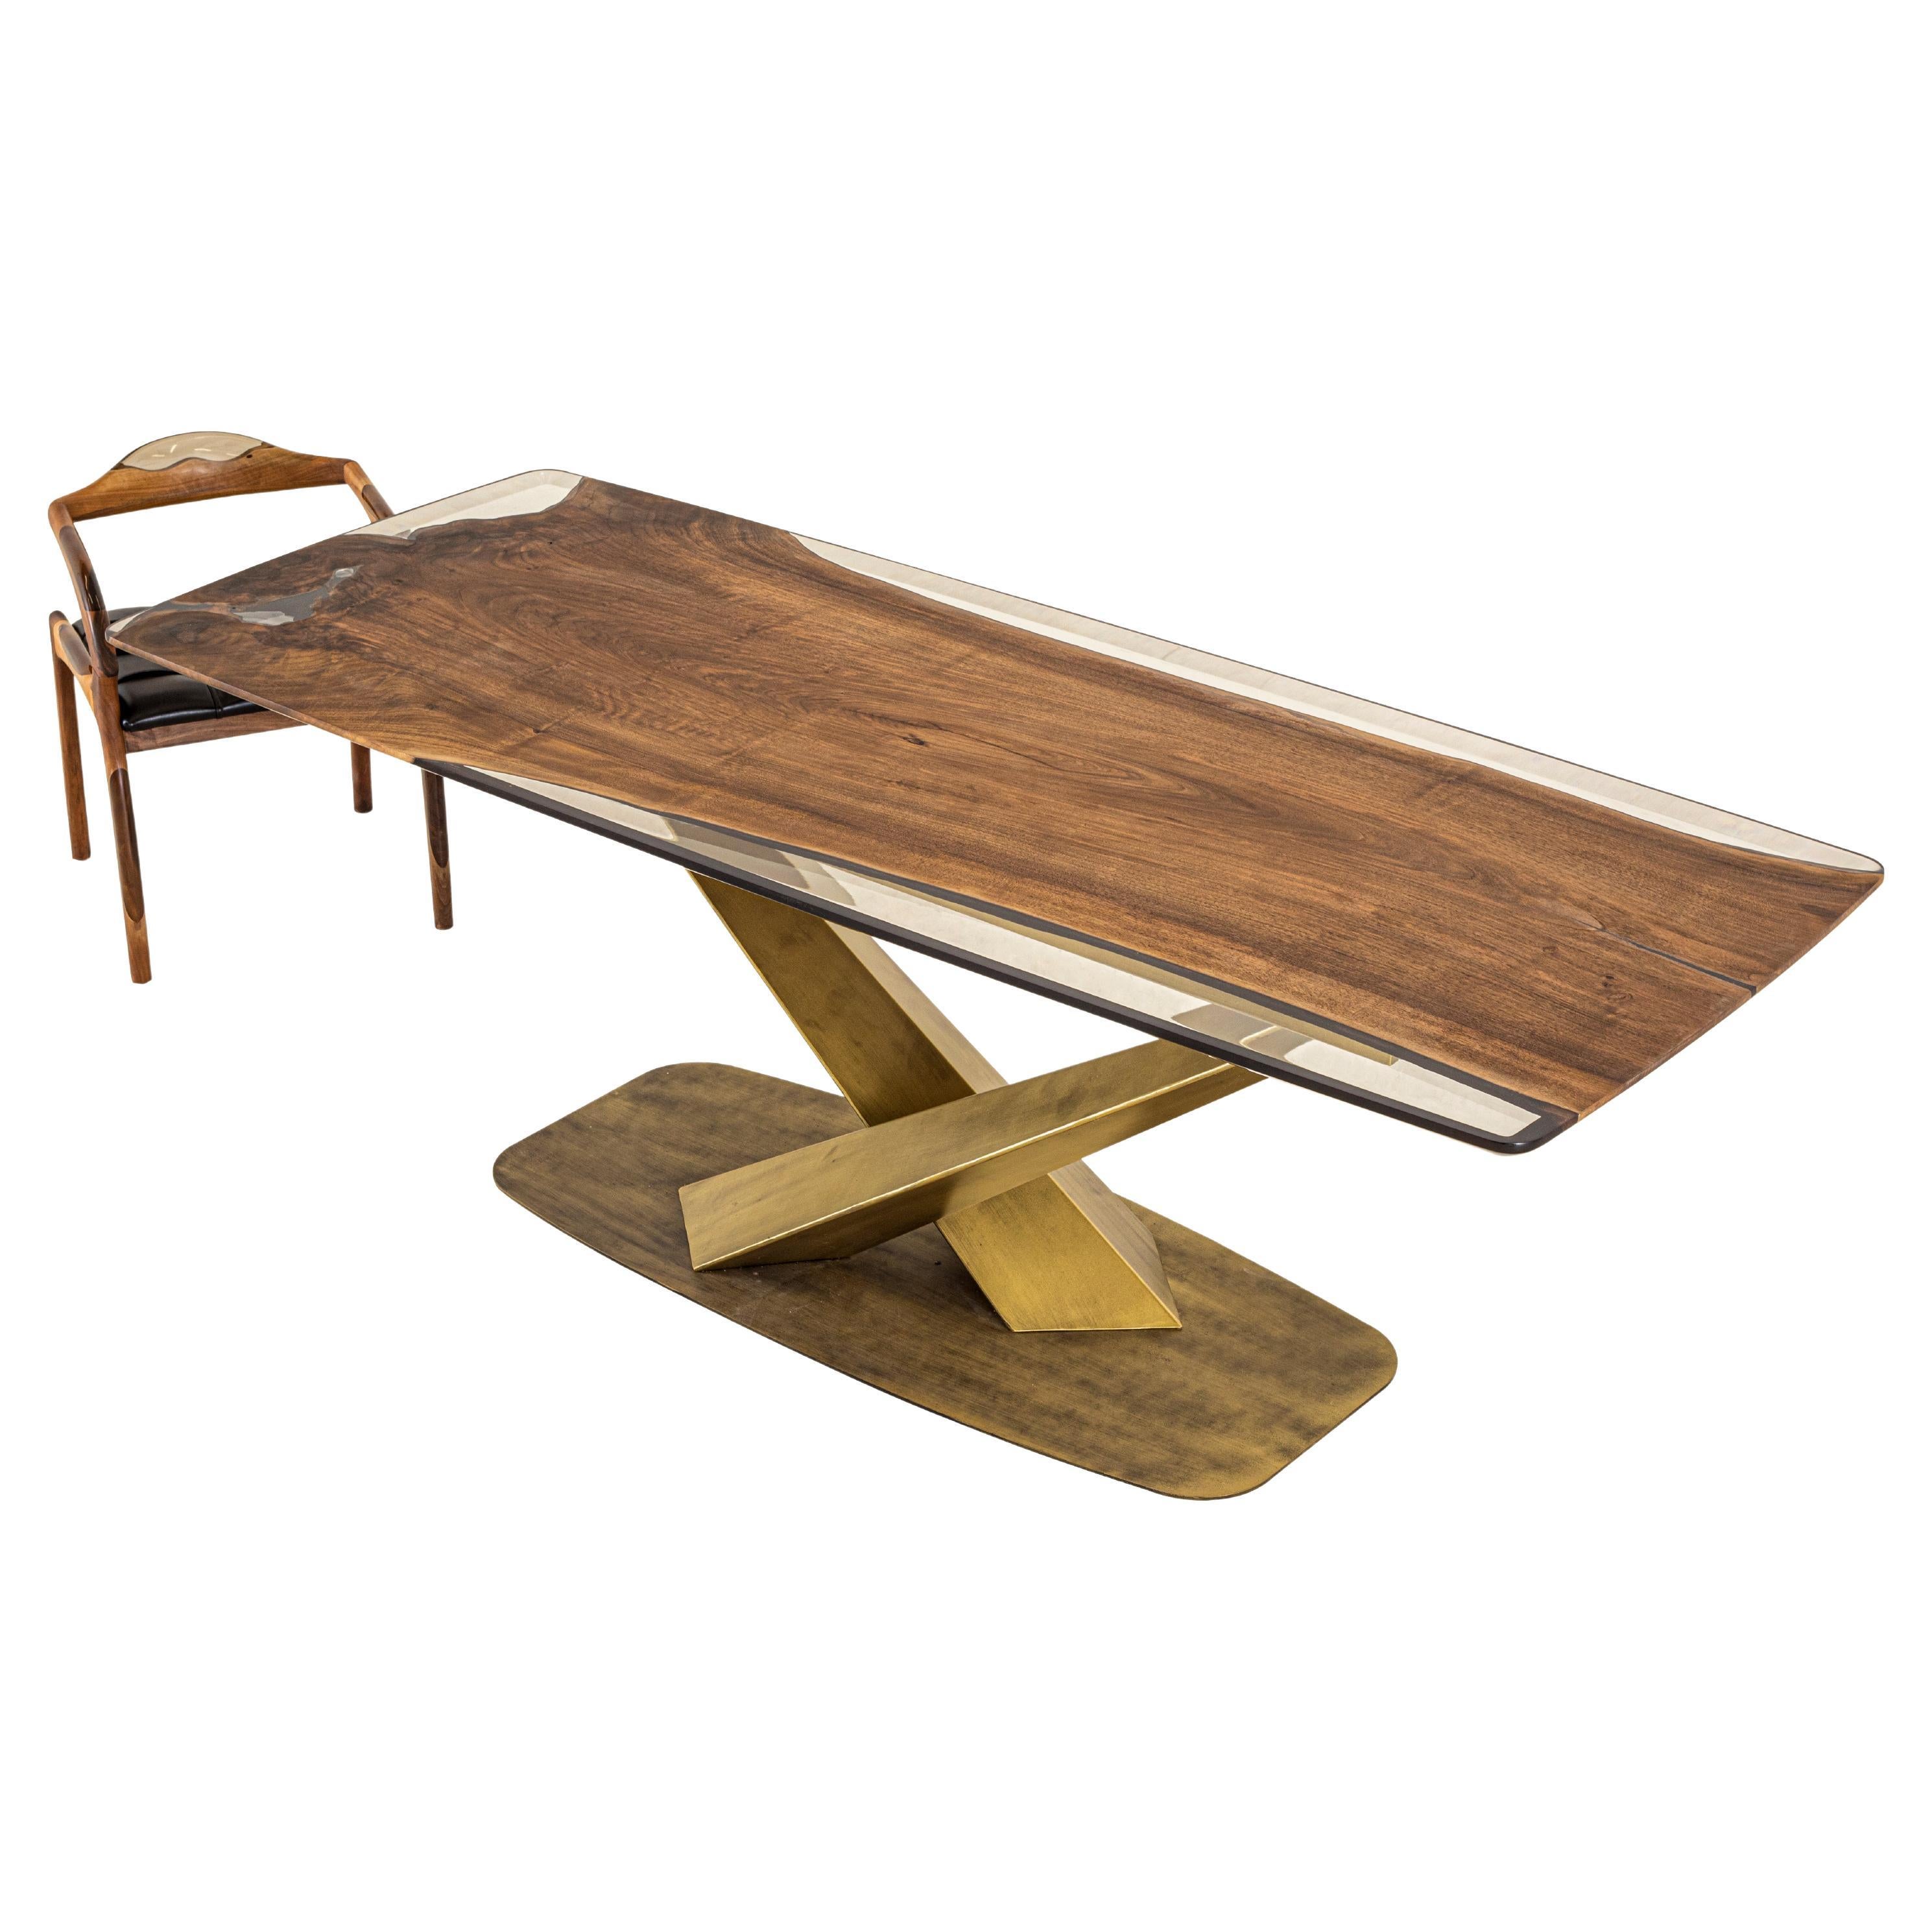 One Piece Walnut Clear Epoxy Resin River Table For Sale